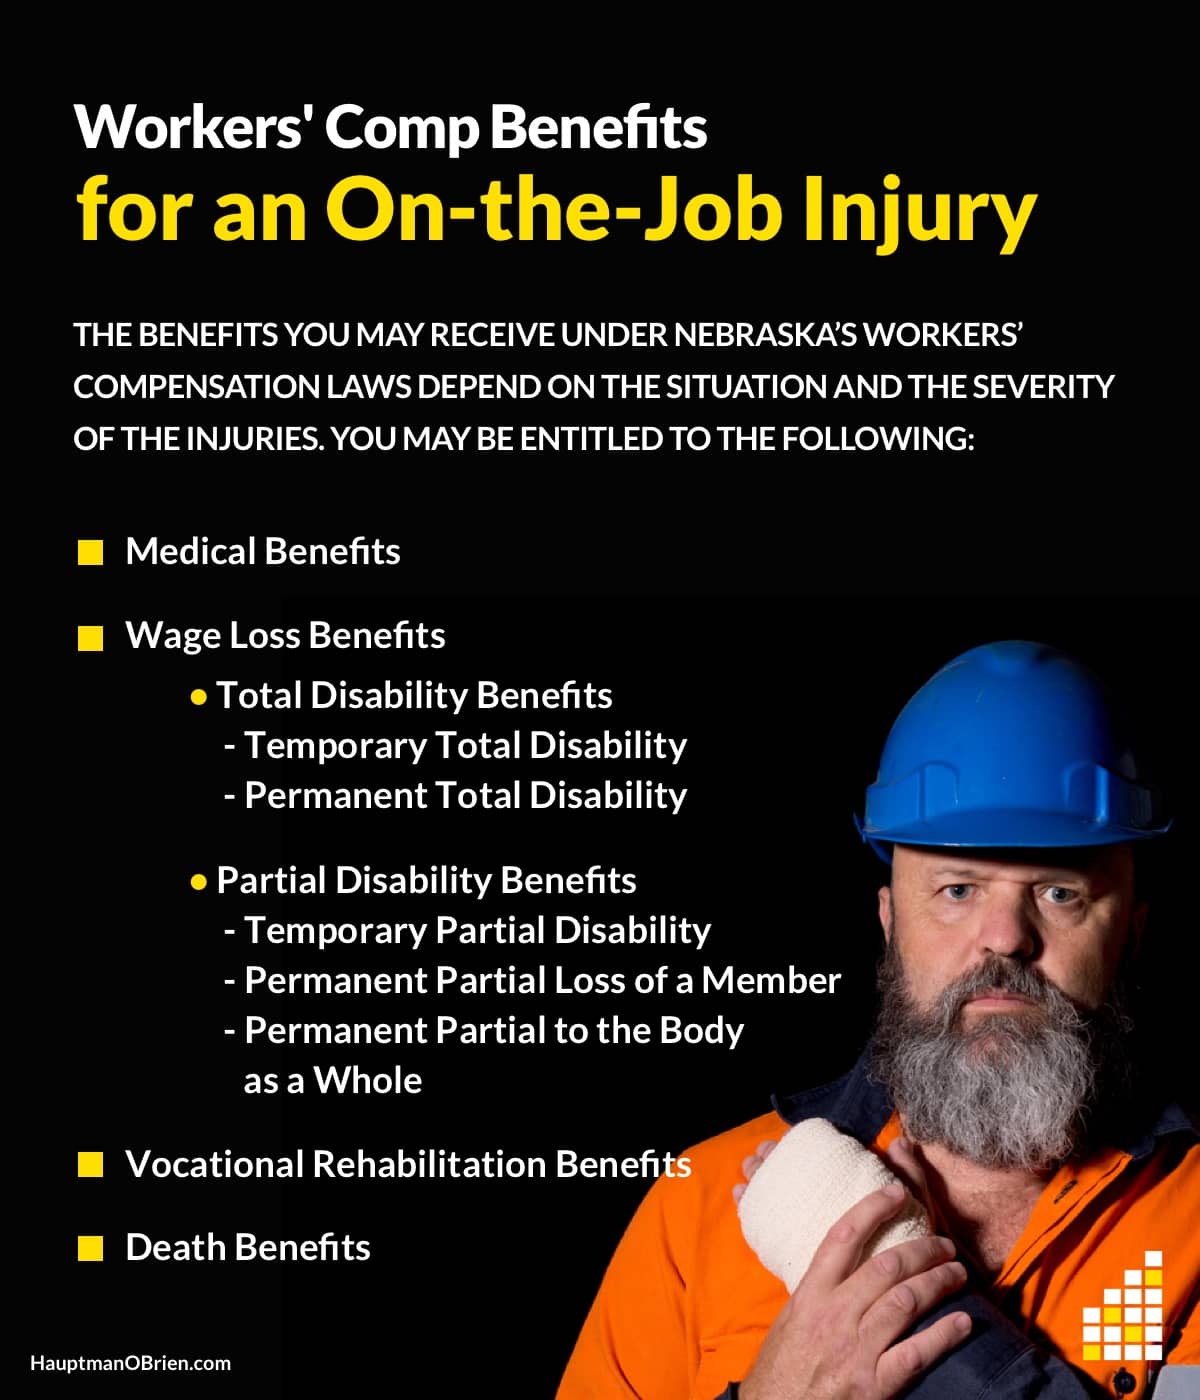 Workers' Compensation Benefits | Hauptman, O'Brien, Wolf and Lathrop